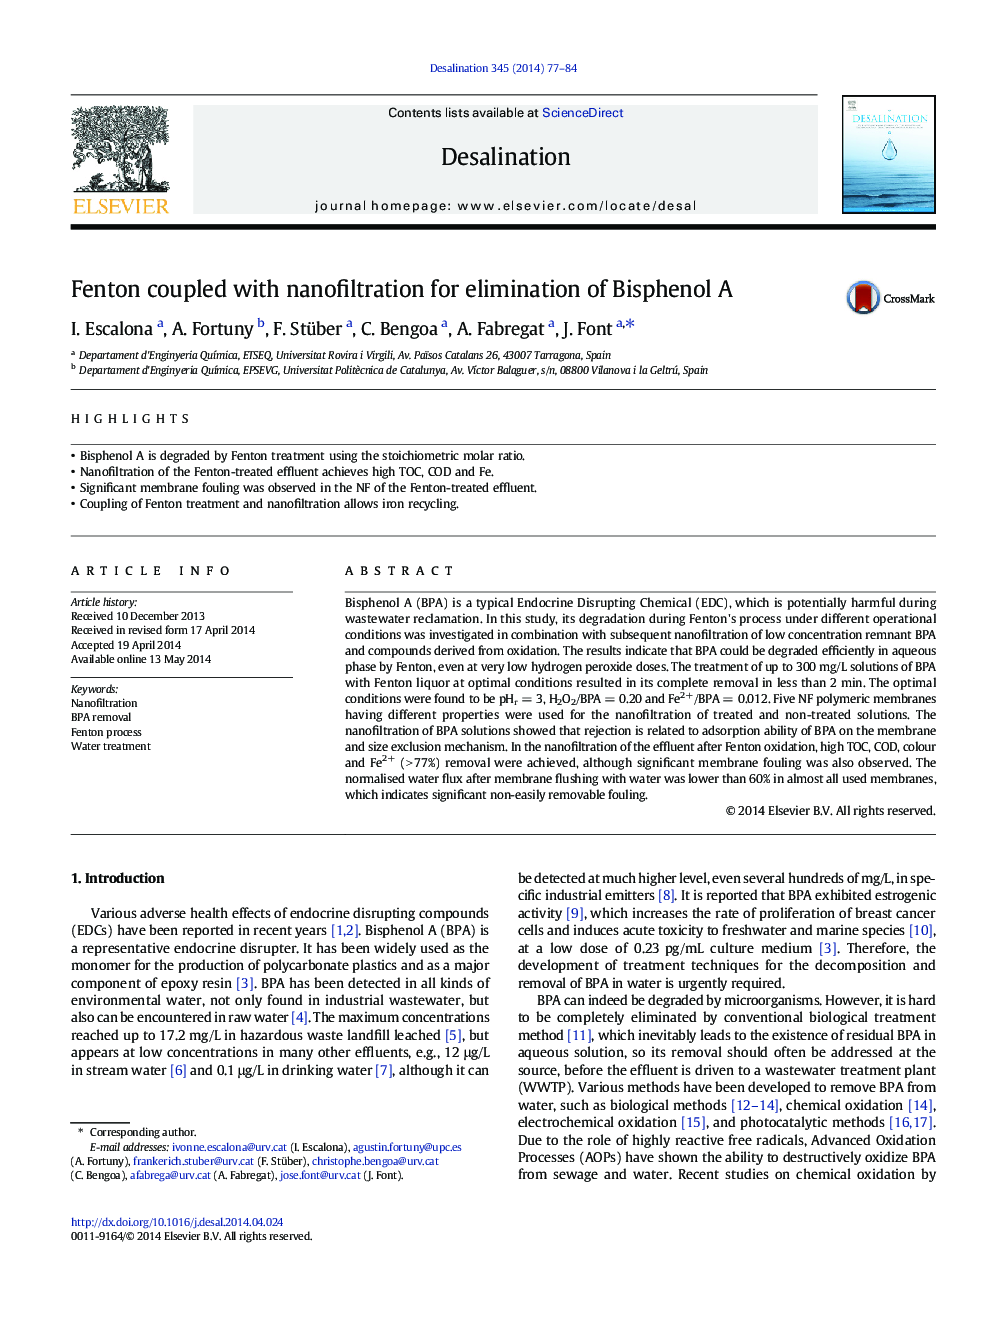 Fenton coupled with nanofiltration for elimination of Bisphenol A